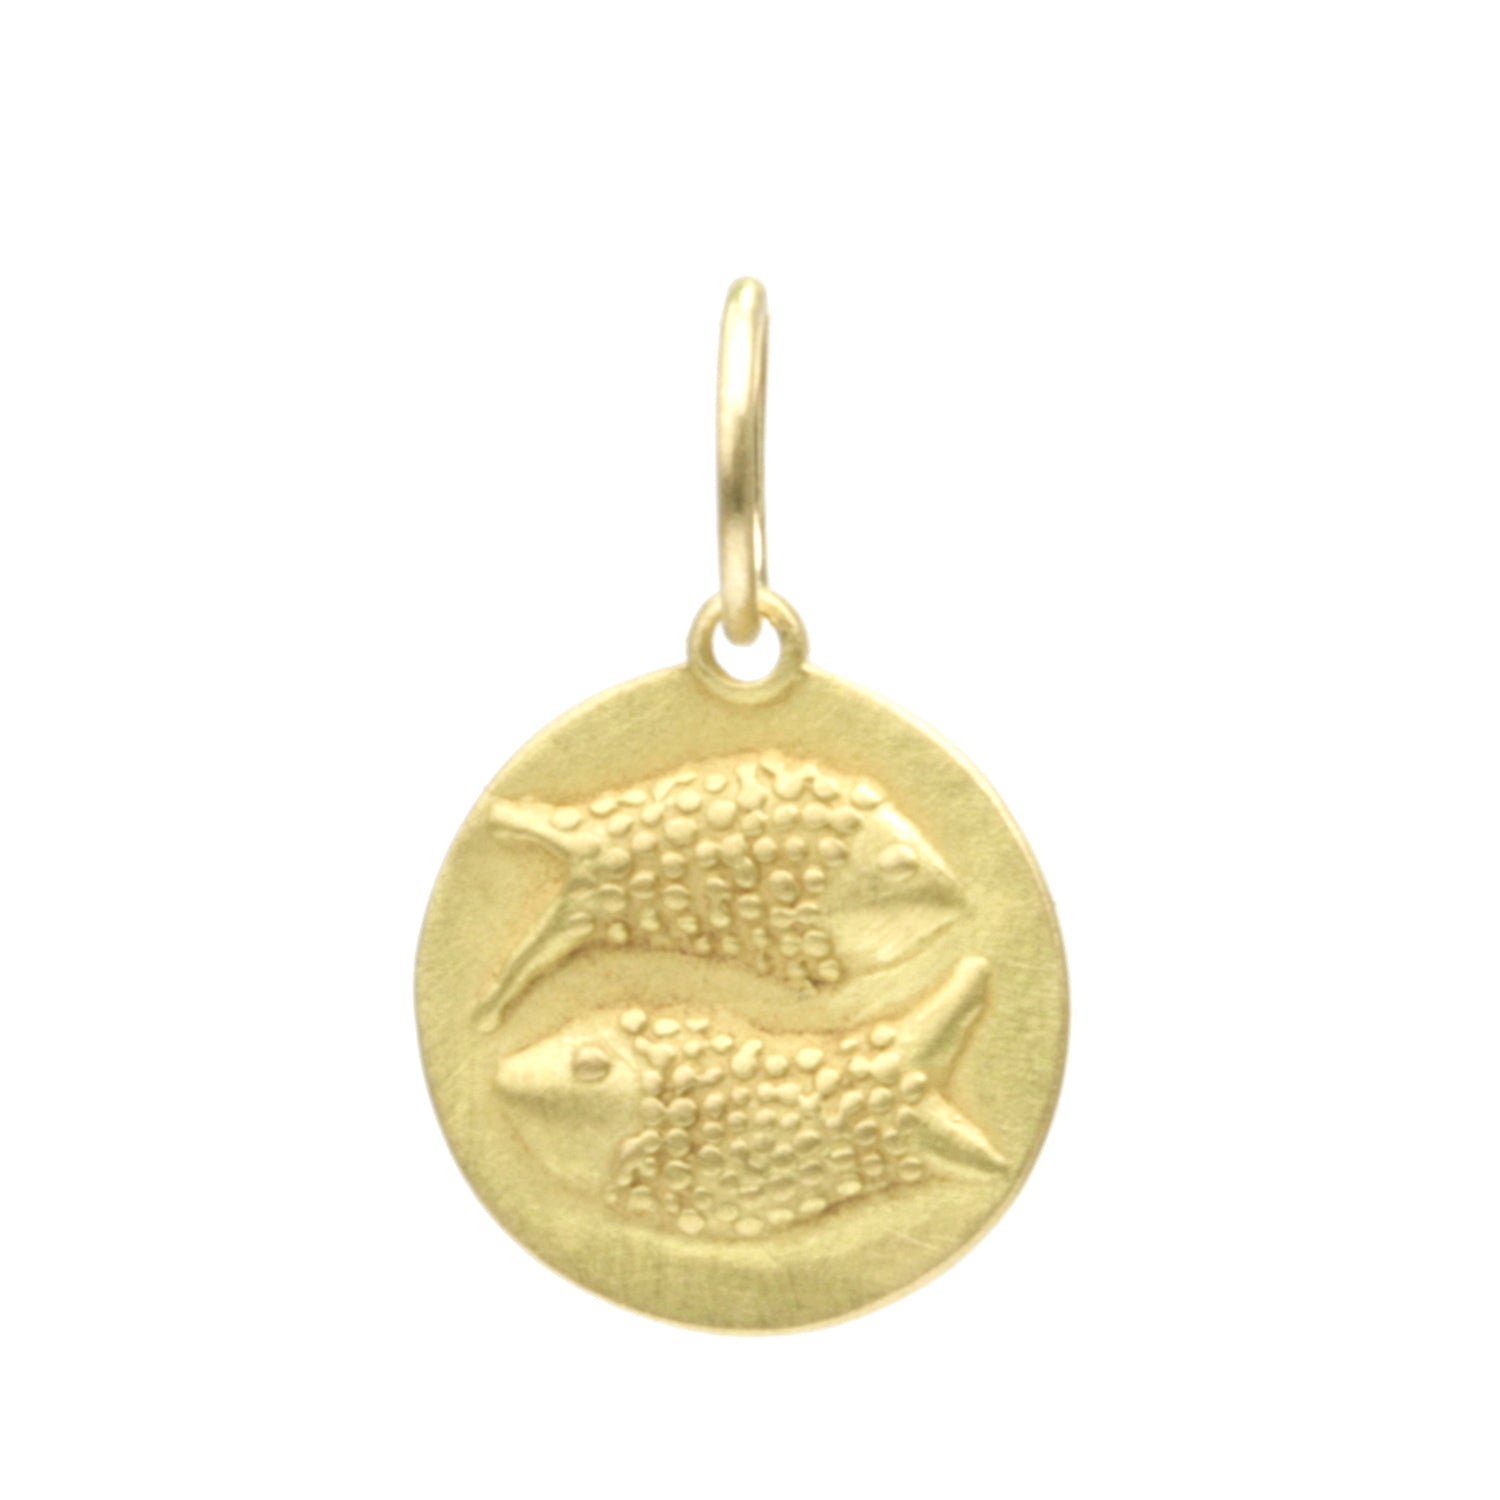 Pisces Medal charm with large bale